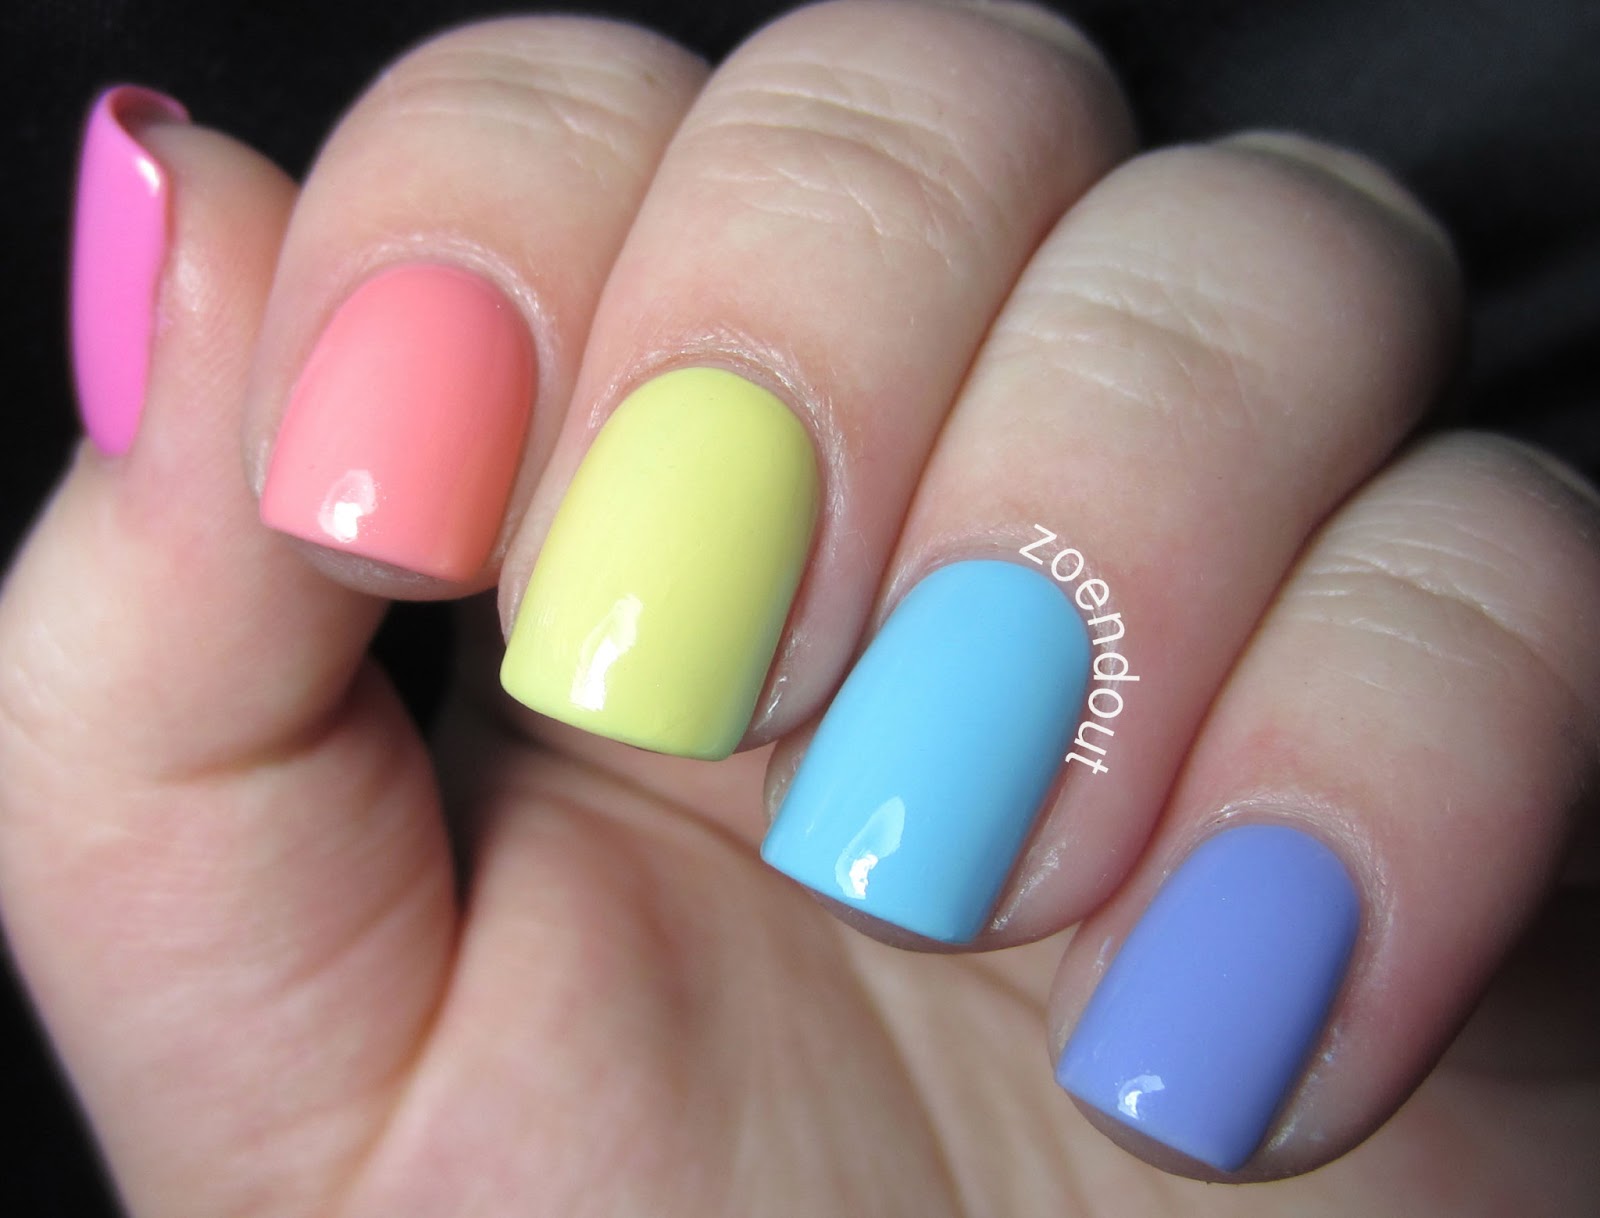 7. Pastel Nail Polish for Summer in India - wide 2